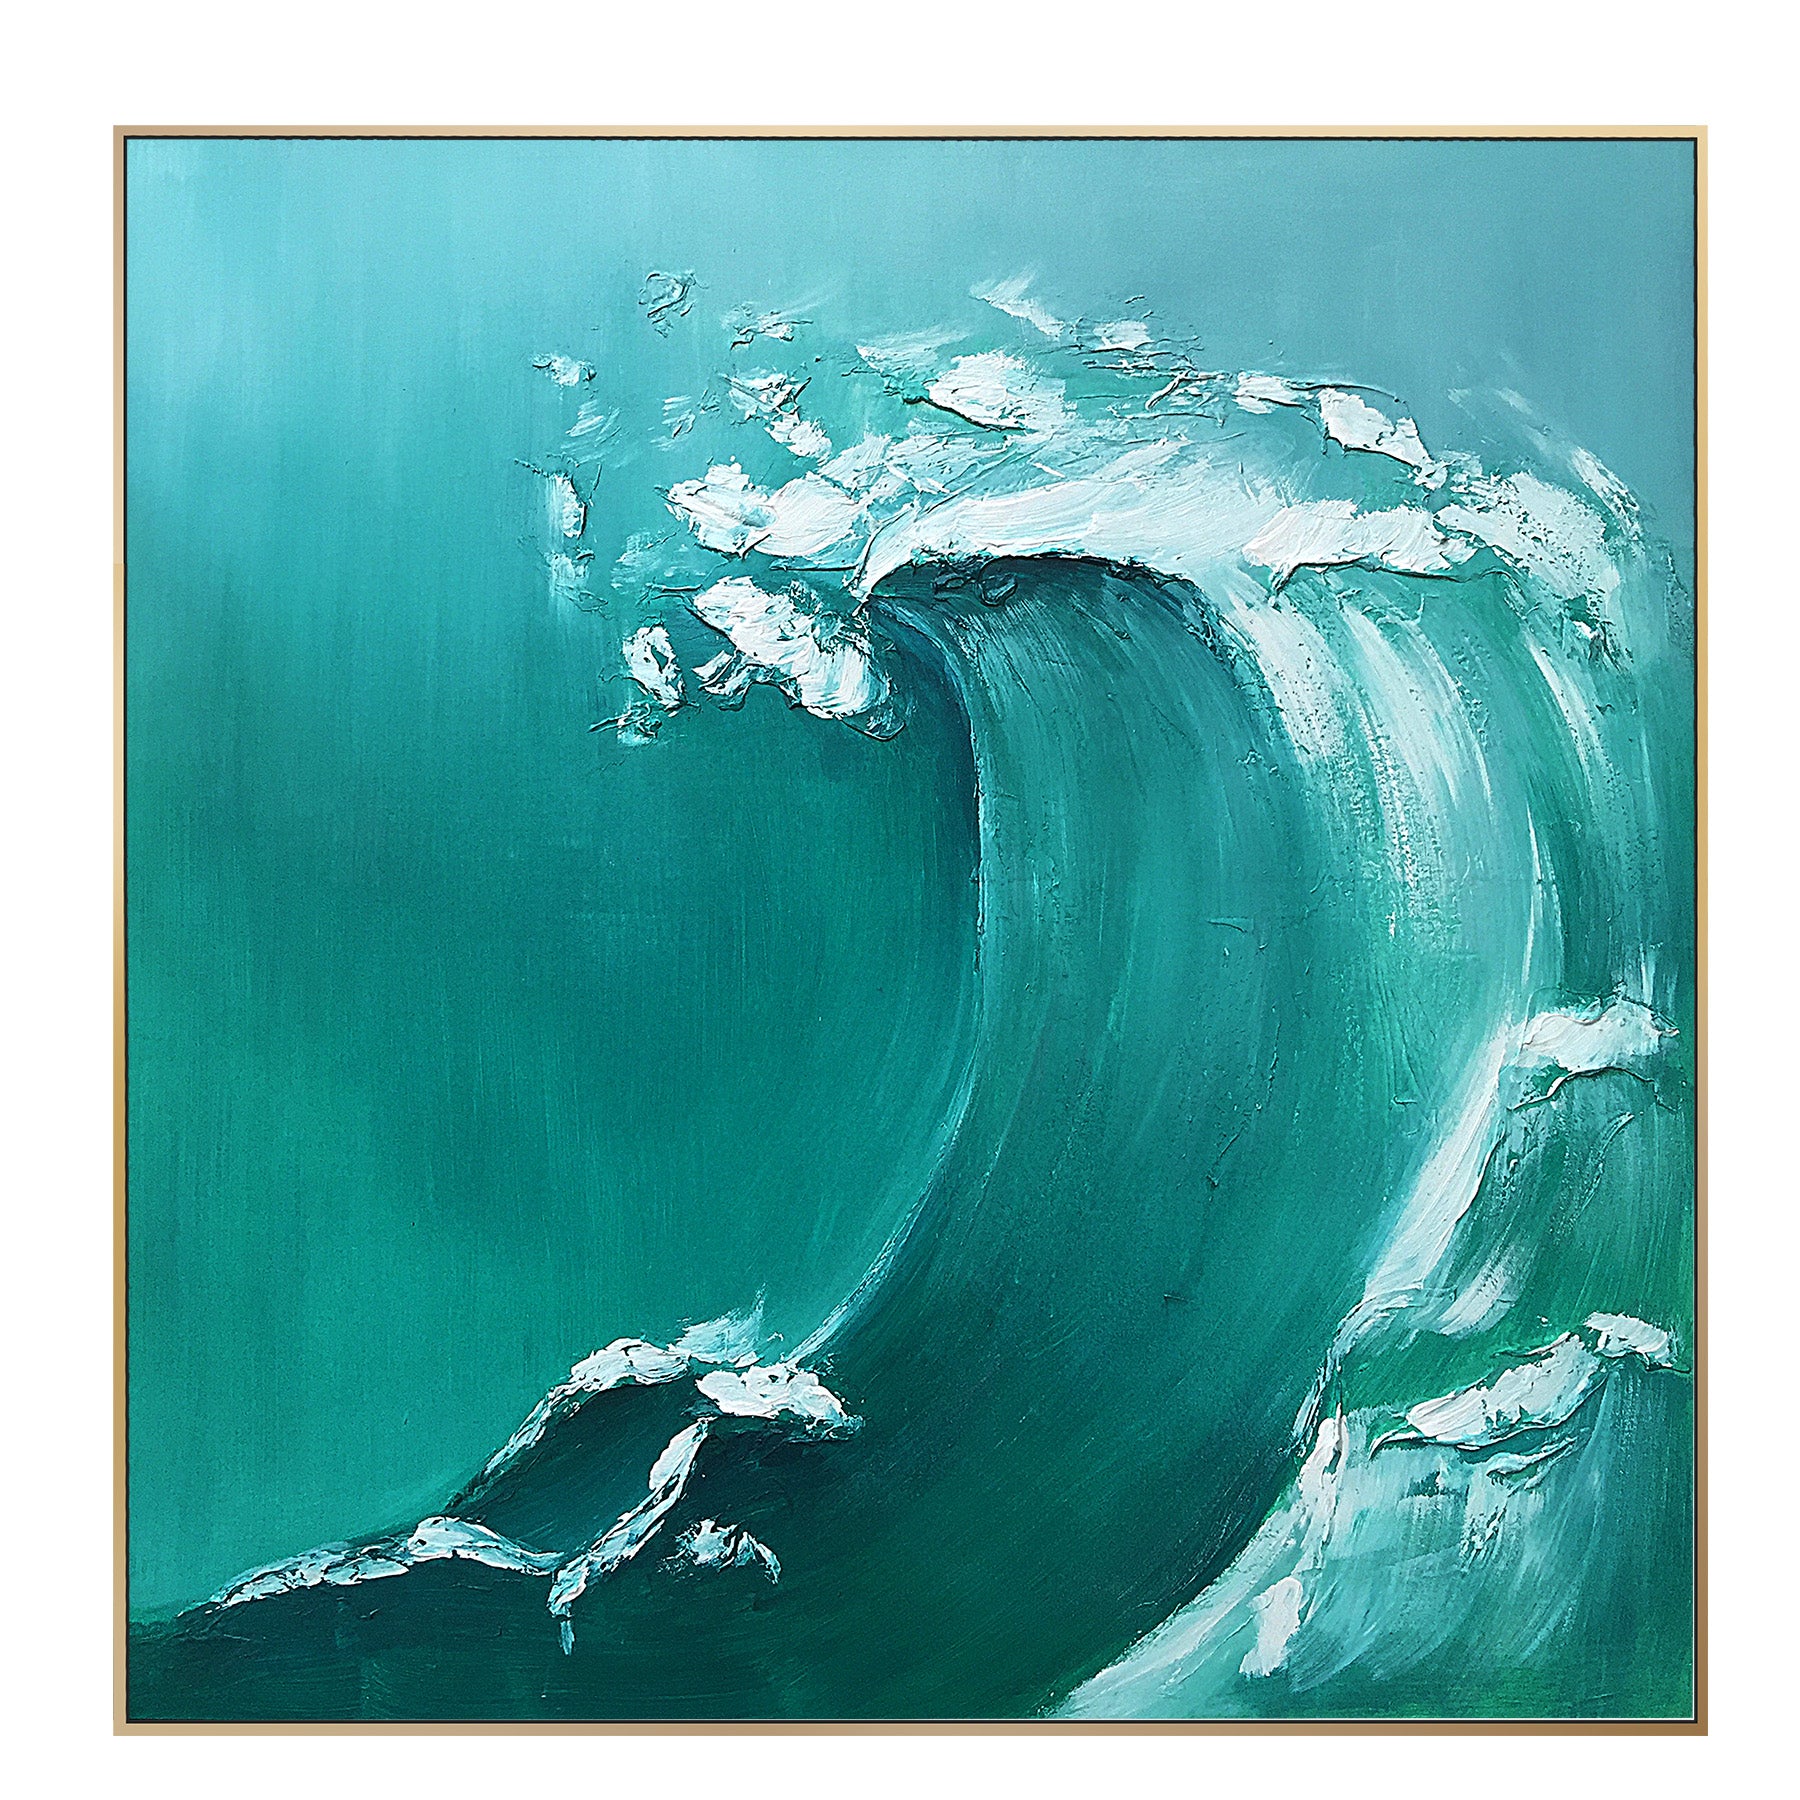 The Big Wave Hand Painted Art Painting With 140X140 Cm Frame Soaap0012